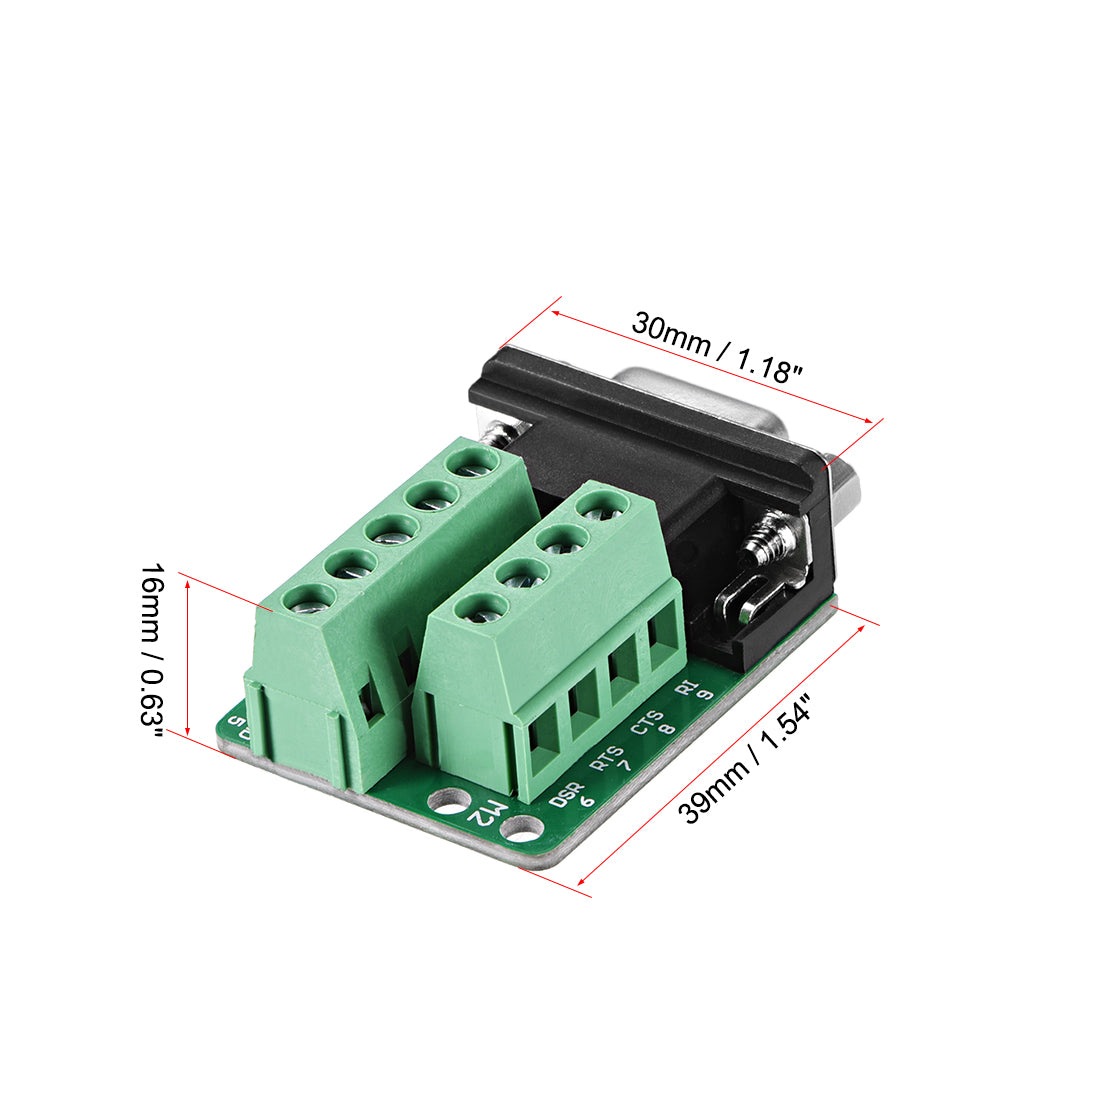 uxcell Uxcell D-sub DB9 Breakout Board Connector 9 Pin 2-row Female Port Solderless Terminal Block Adapter with Positioning Nuts